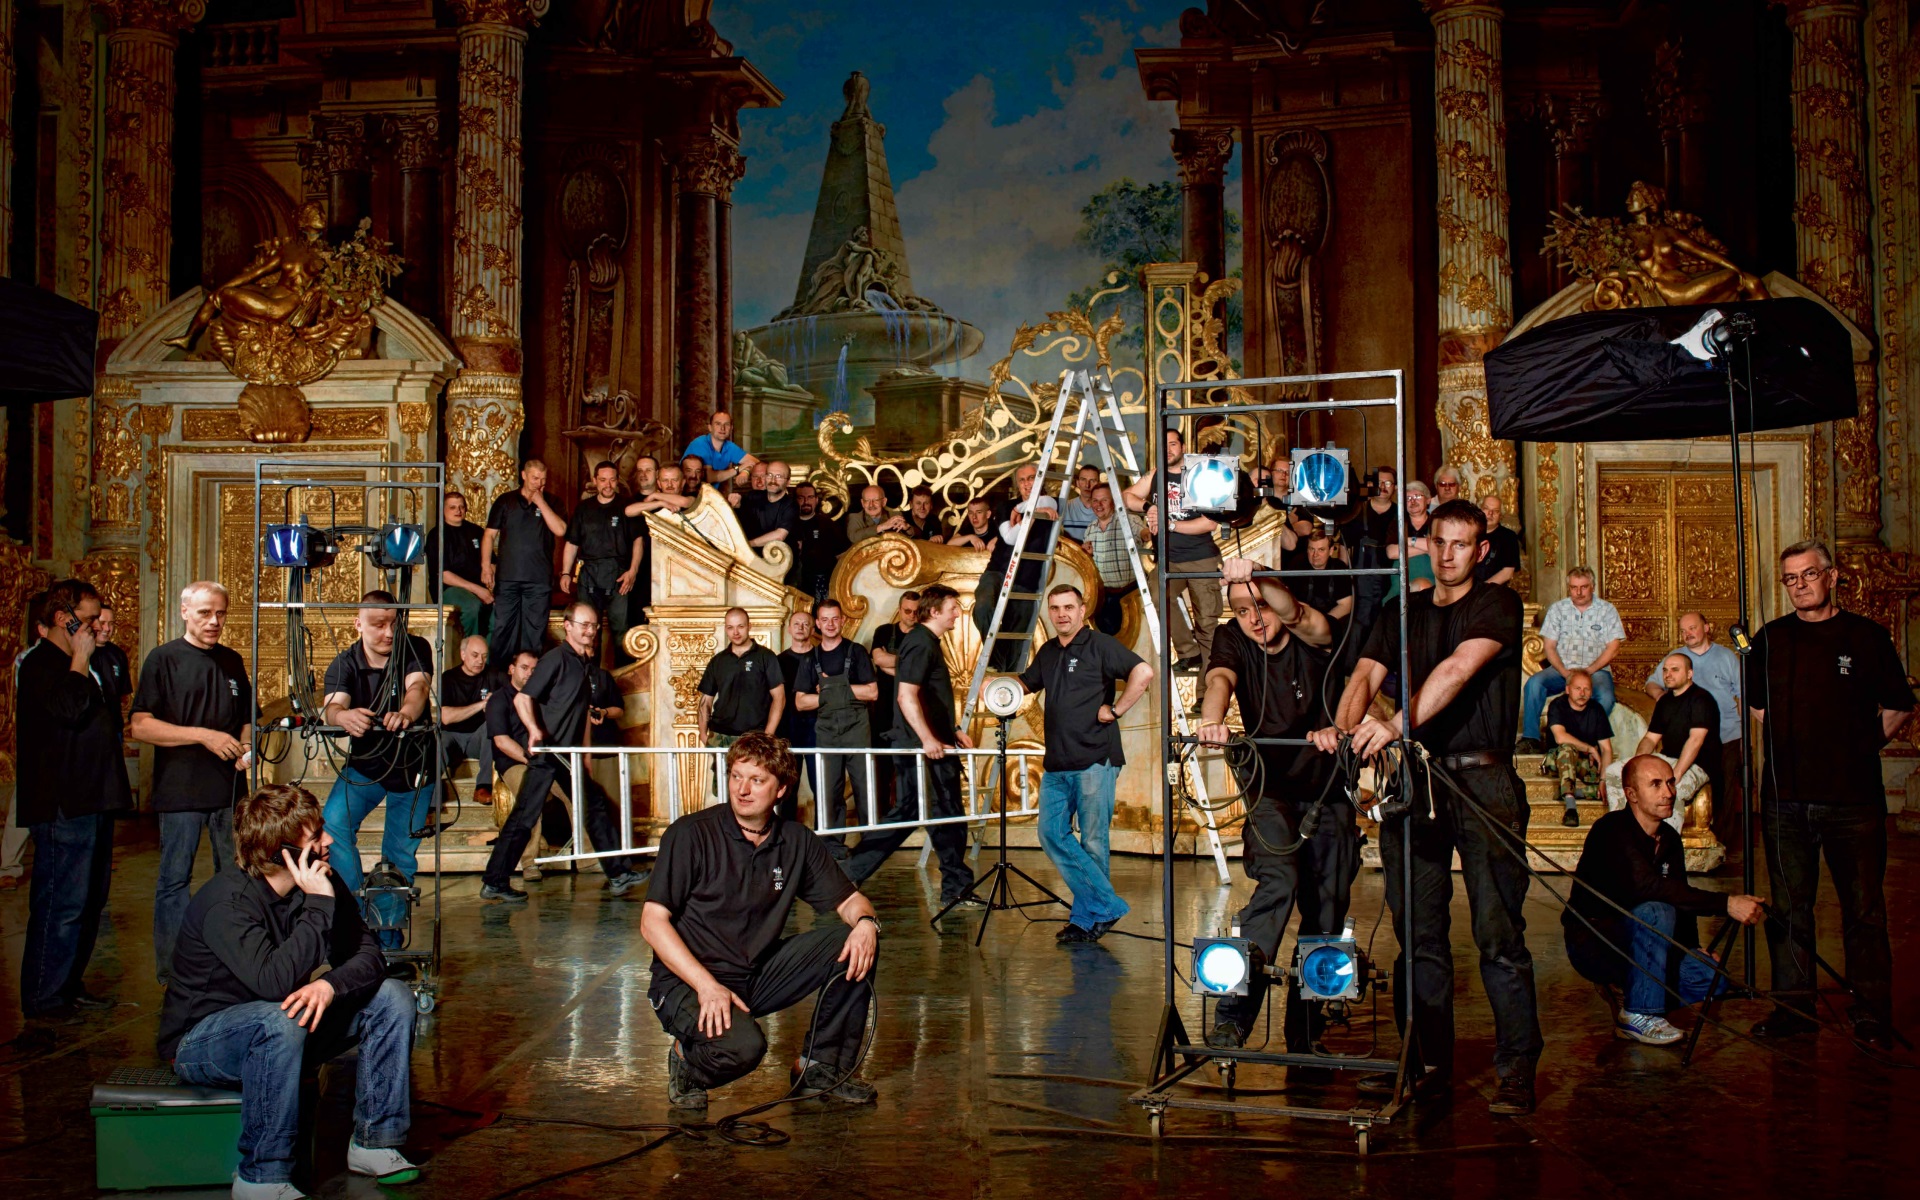 Stagehands, photo by Anna Fedisz